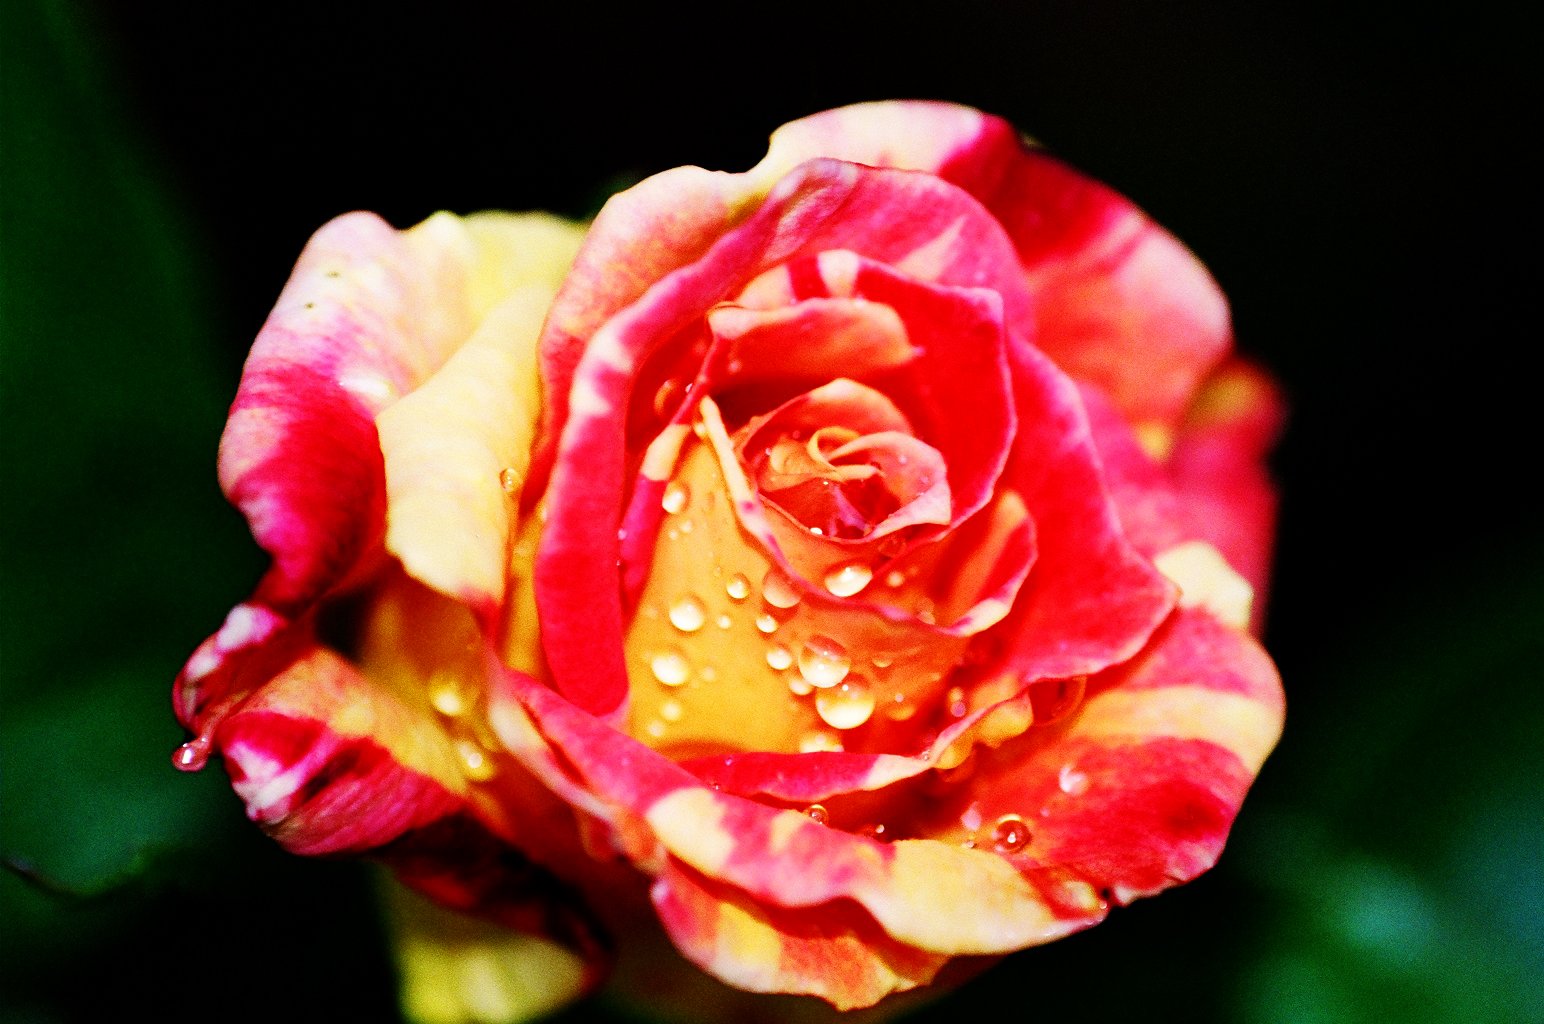 red yellow and white roses with rain droplets